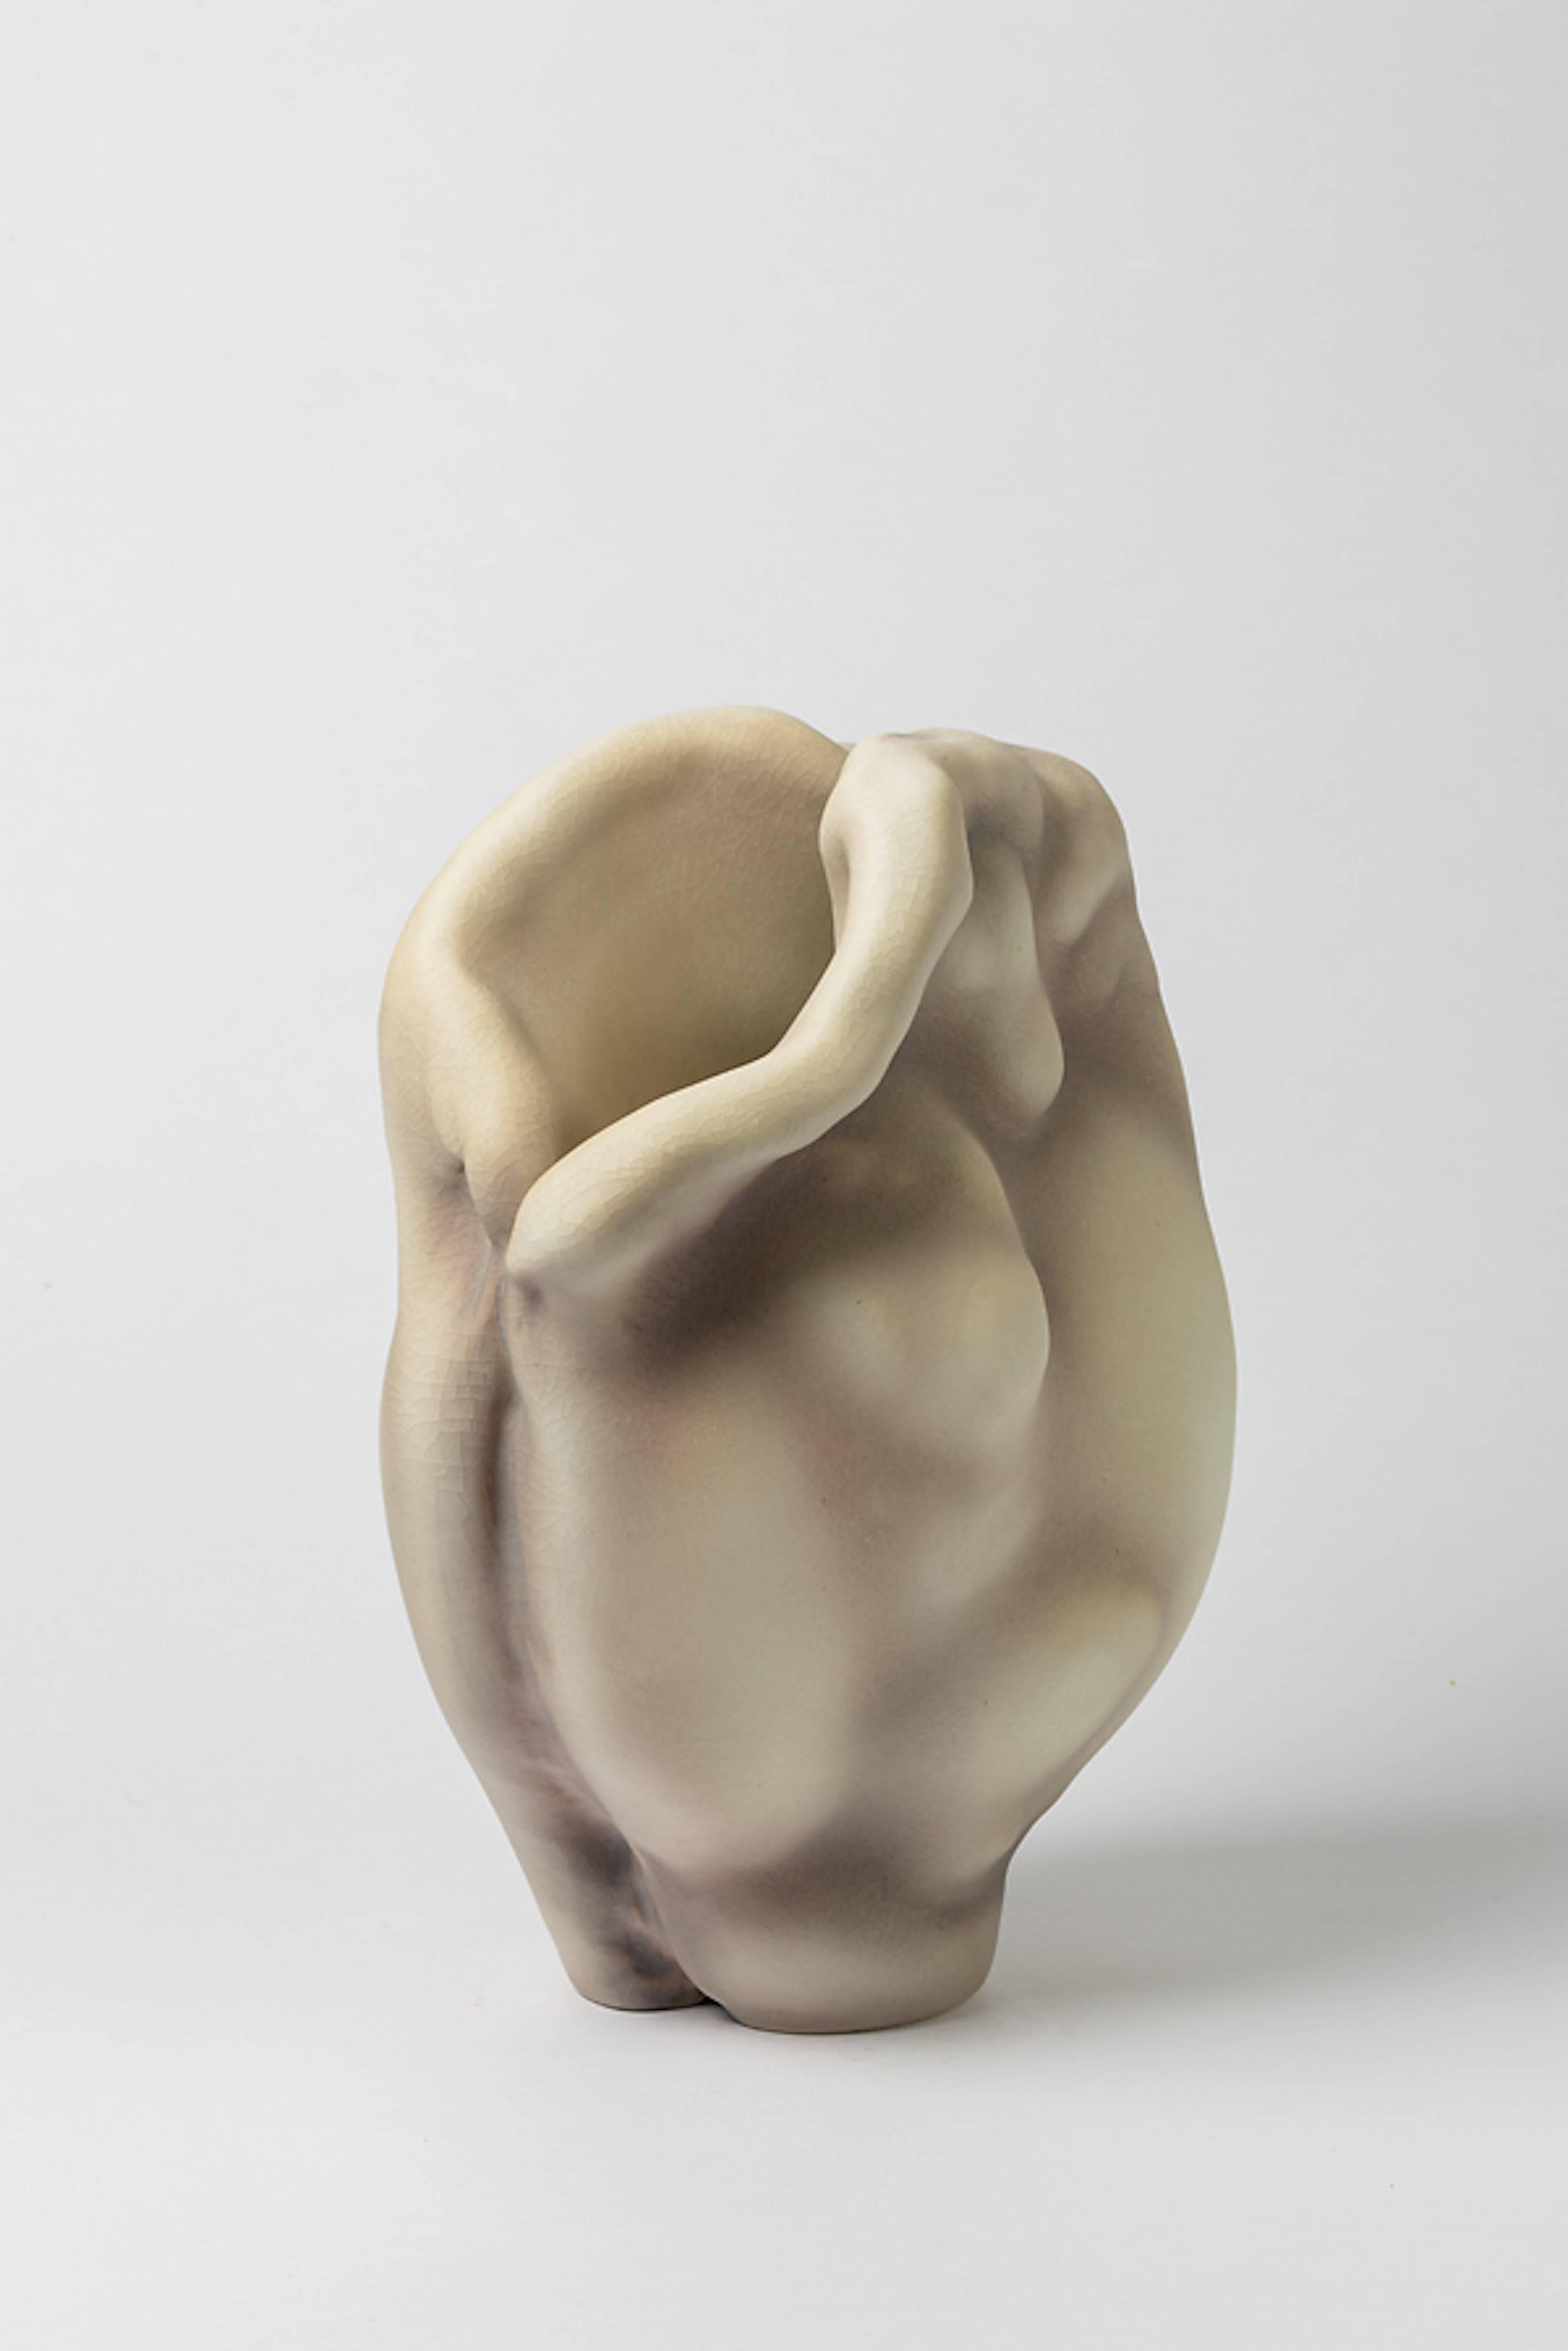 A porcelain sculpture by Wayne Fischer (French-American).
Unique piece.
Signed at the base 